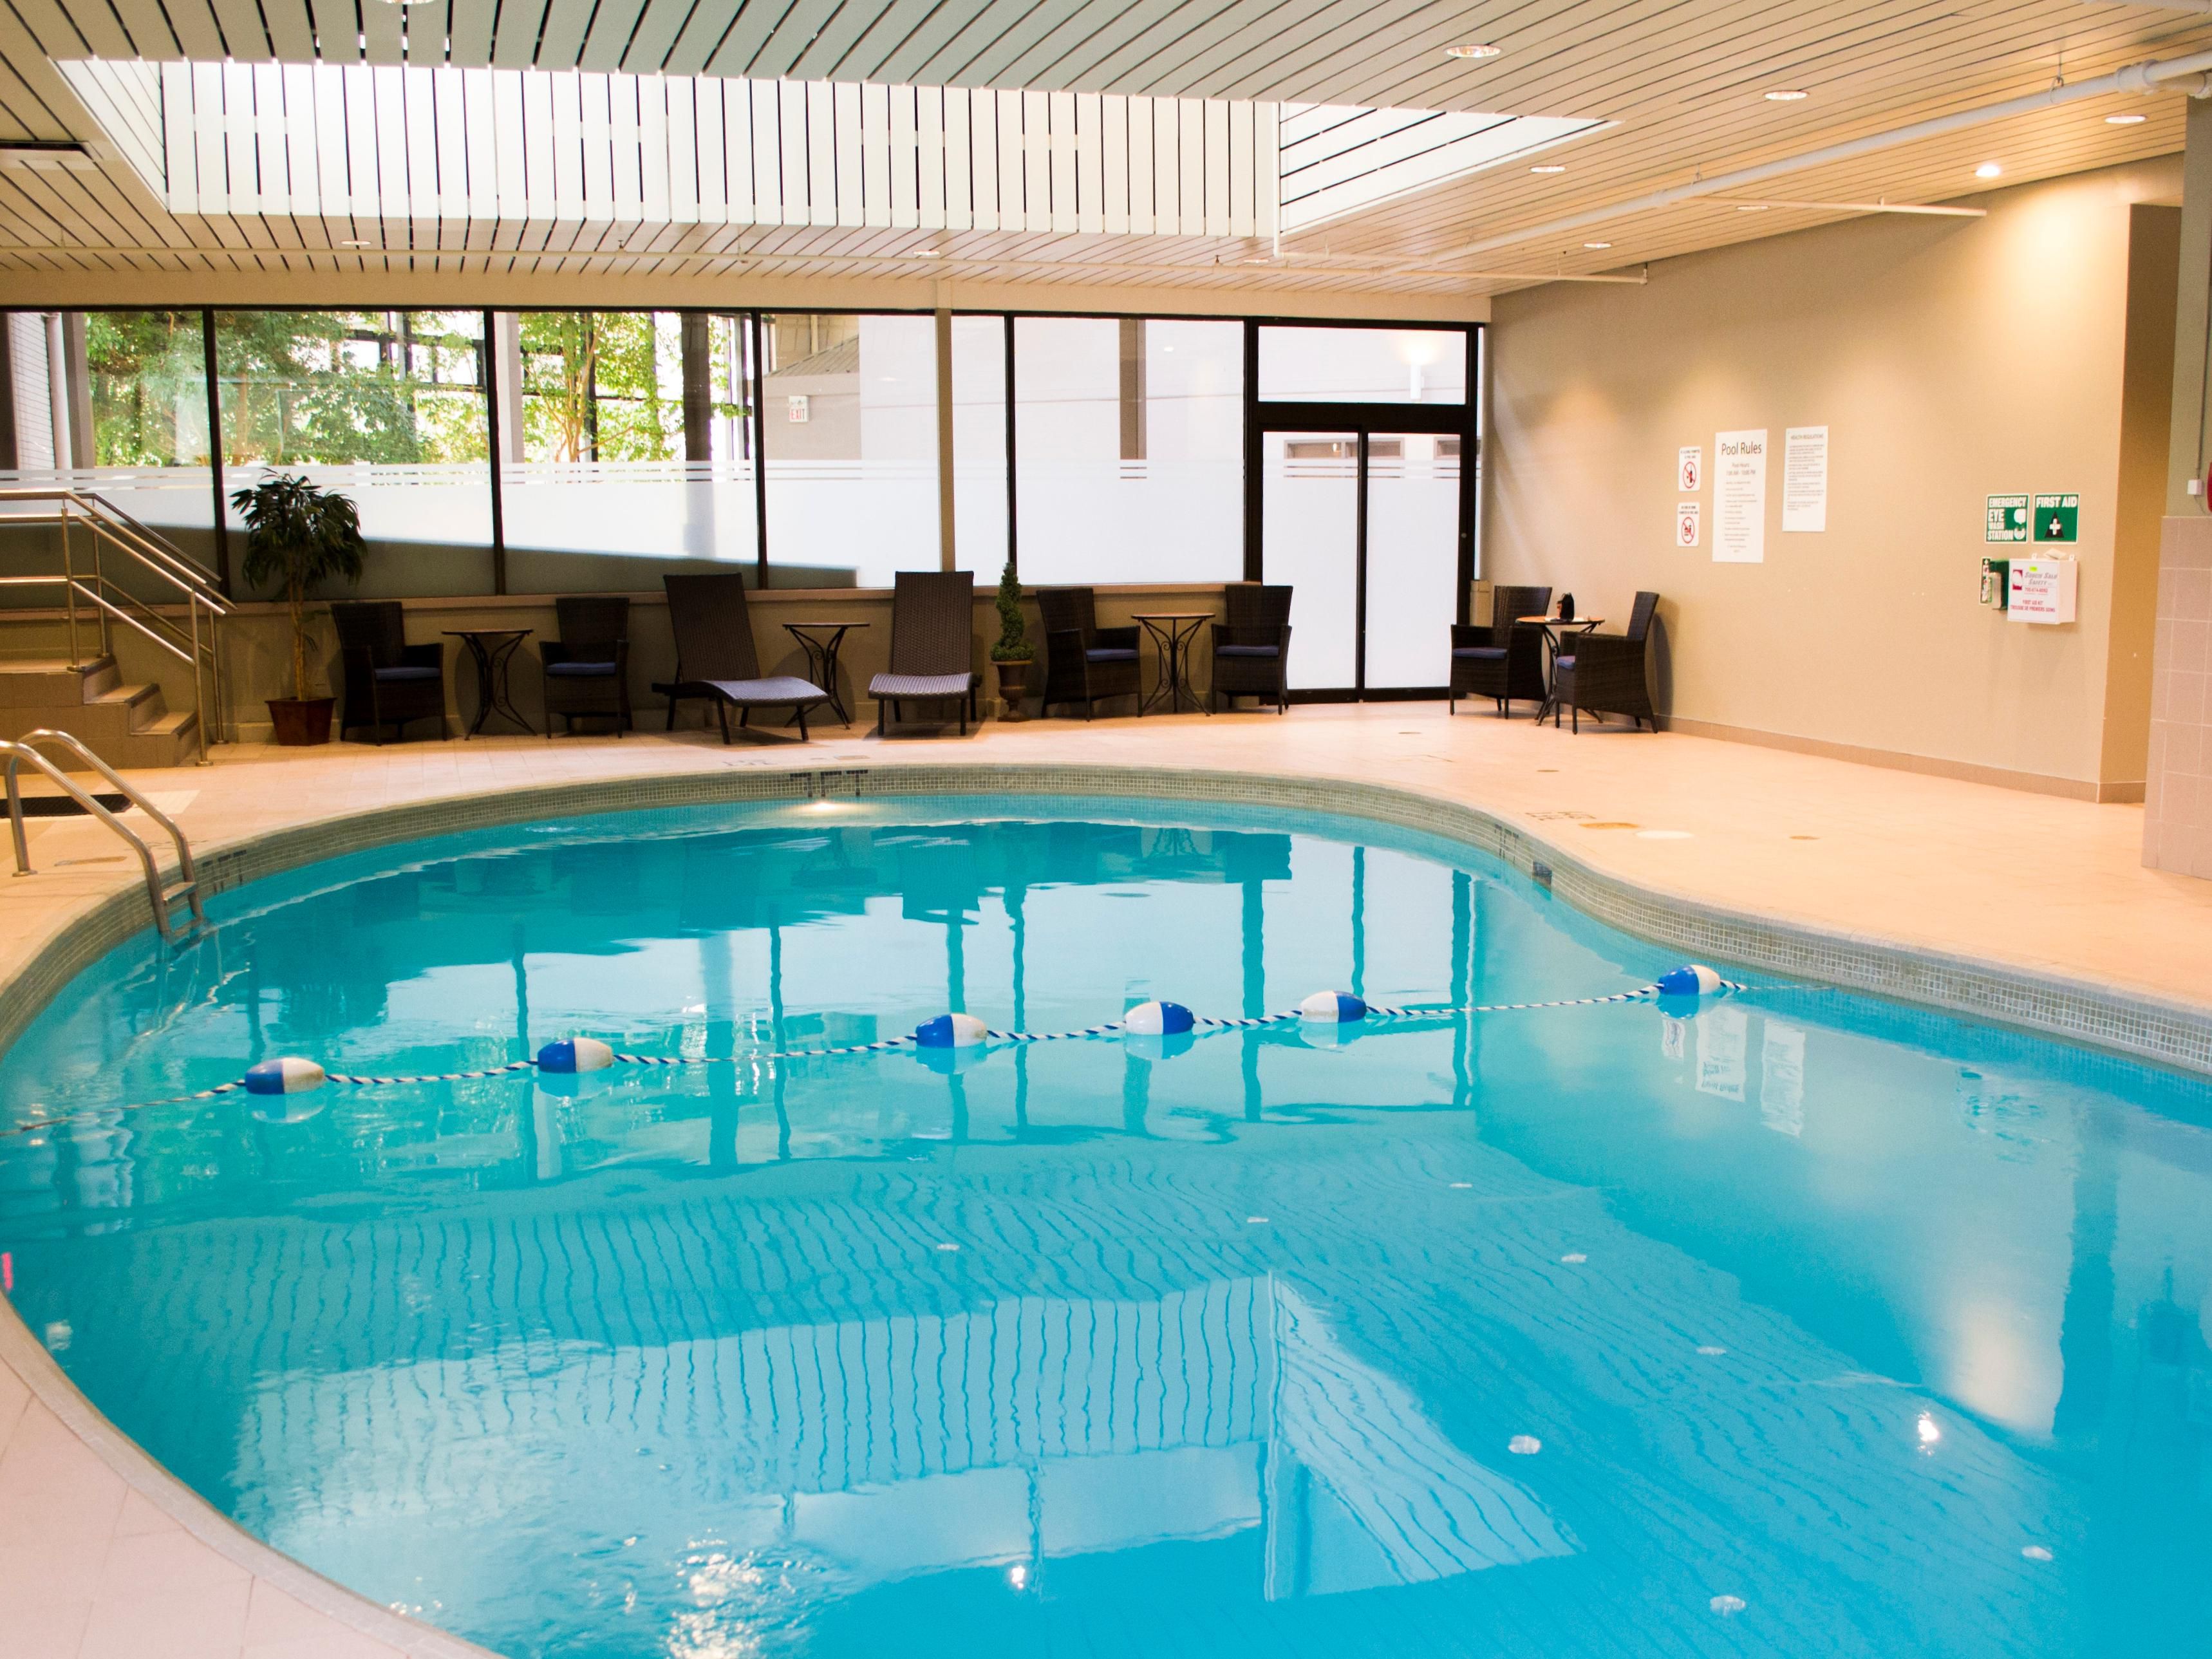 Building memories as a family!  Enjoy quality time together with a dip in the pool after a long day of exploring all that Sudbury has to offer.  Our indoor heated pool is the perfect place to gather and build great memories that last.   